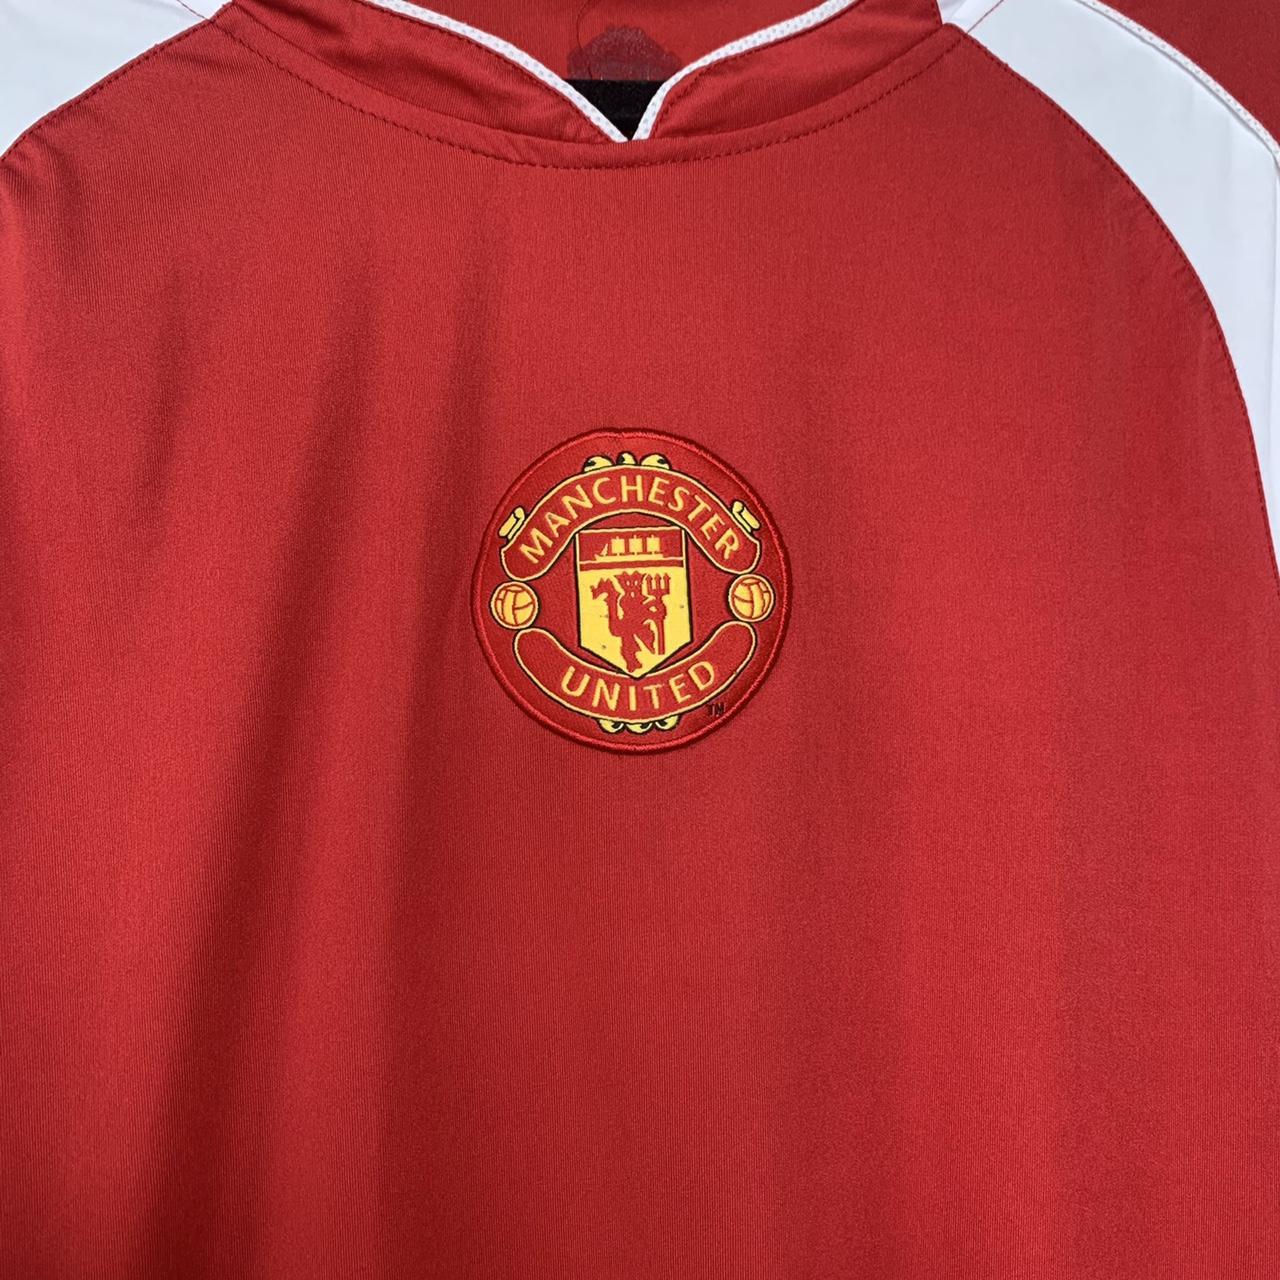 Product Image 2 - Manchester United training jersey .
•
#manchester